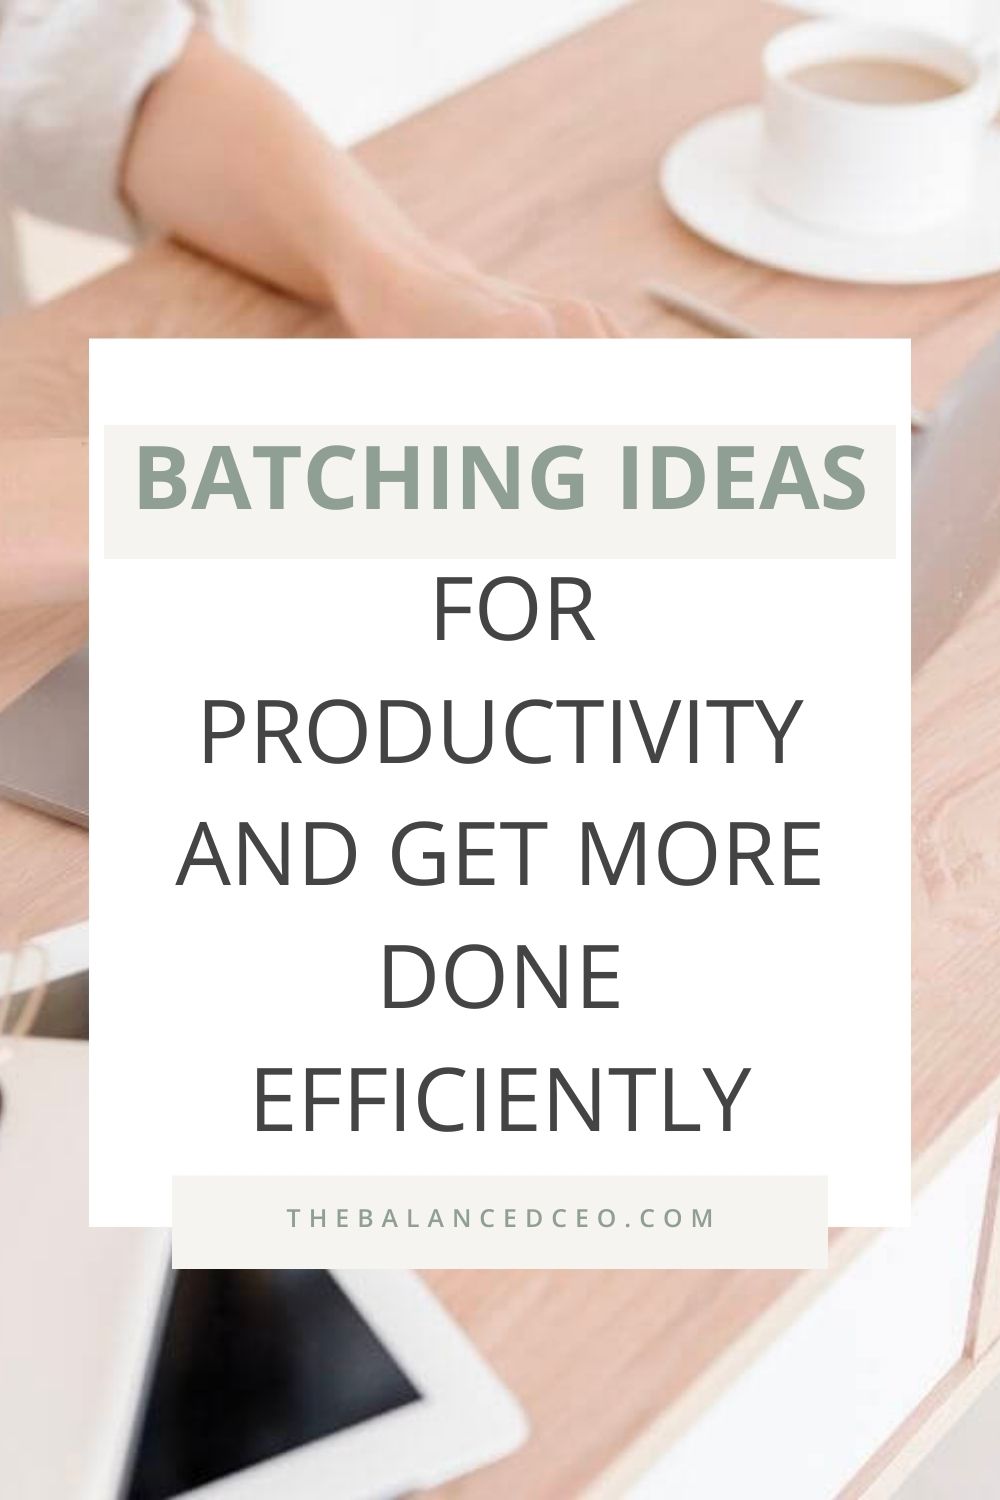 Batching Ideas for Productivity and Get More Done Efficiently